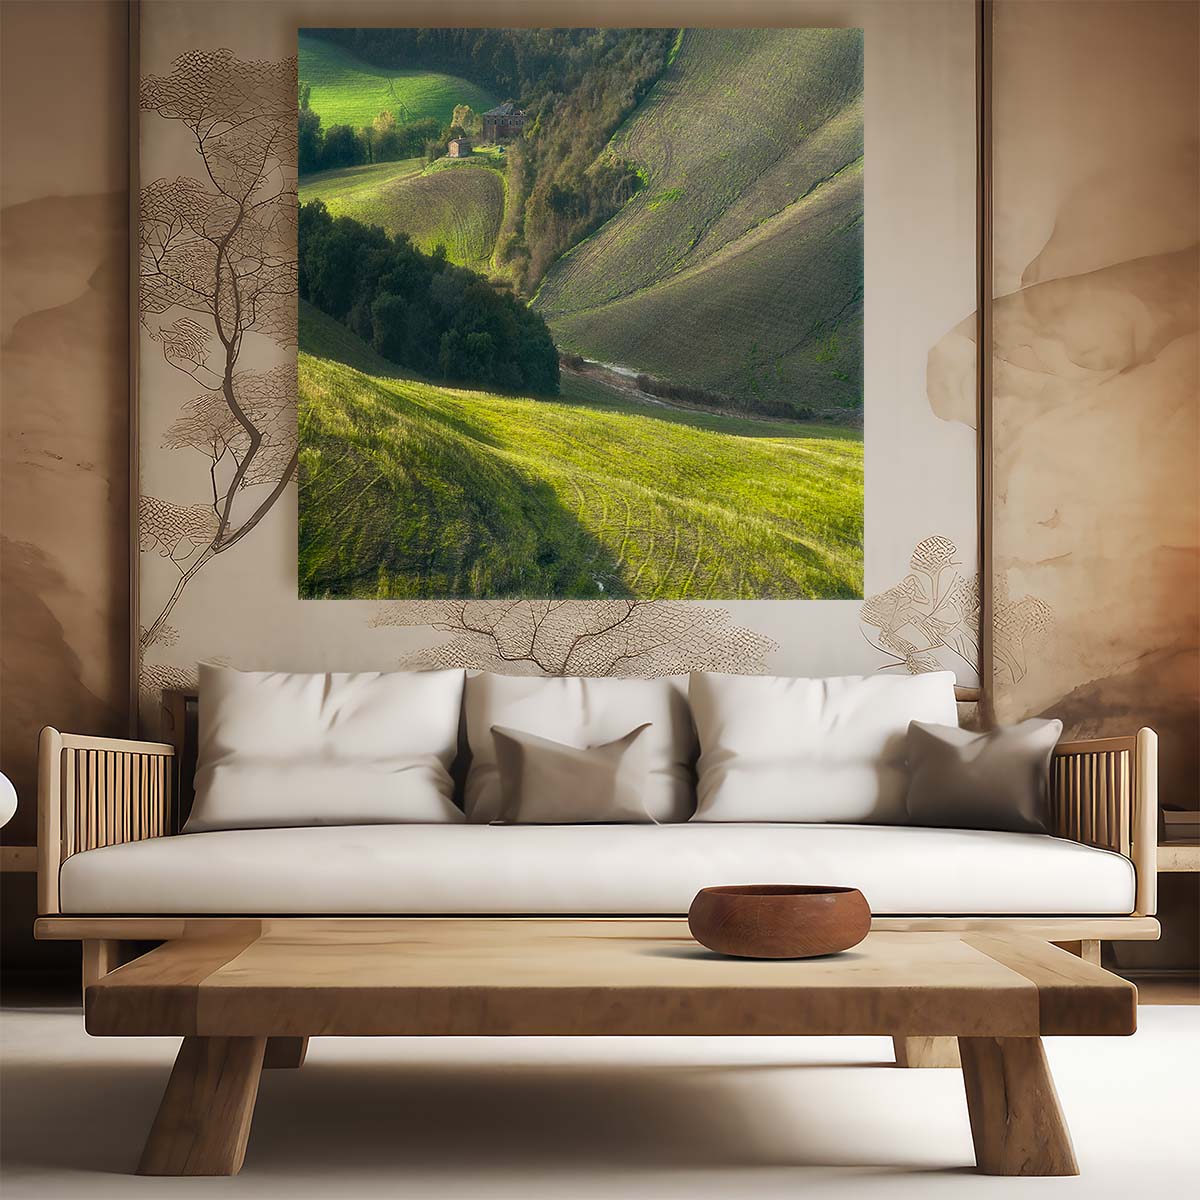 Rolling Hills & Farm Landscape of Tuscany Countryside Wall Art by Luxuriance Designs. Made in USA.